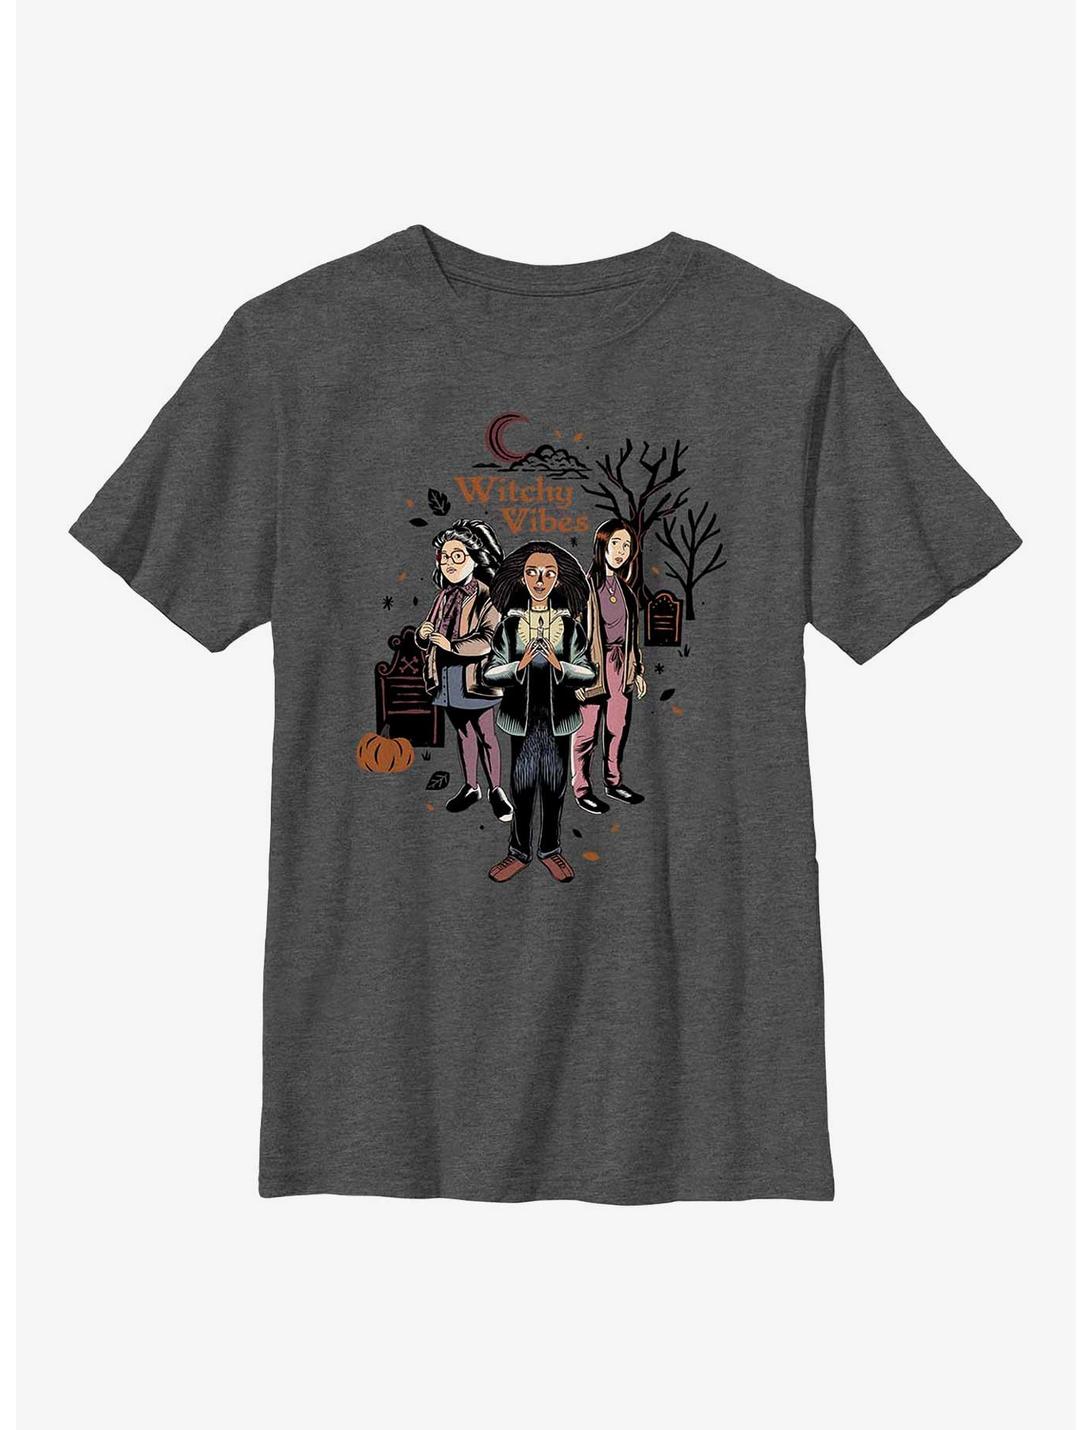 Disney Hocus Pocus 2 Witchy Vibes Youth T-Shirt, CHAR HTR, hi-res